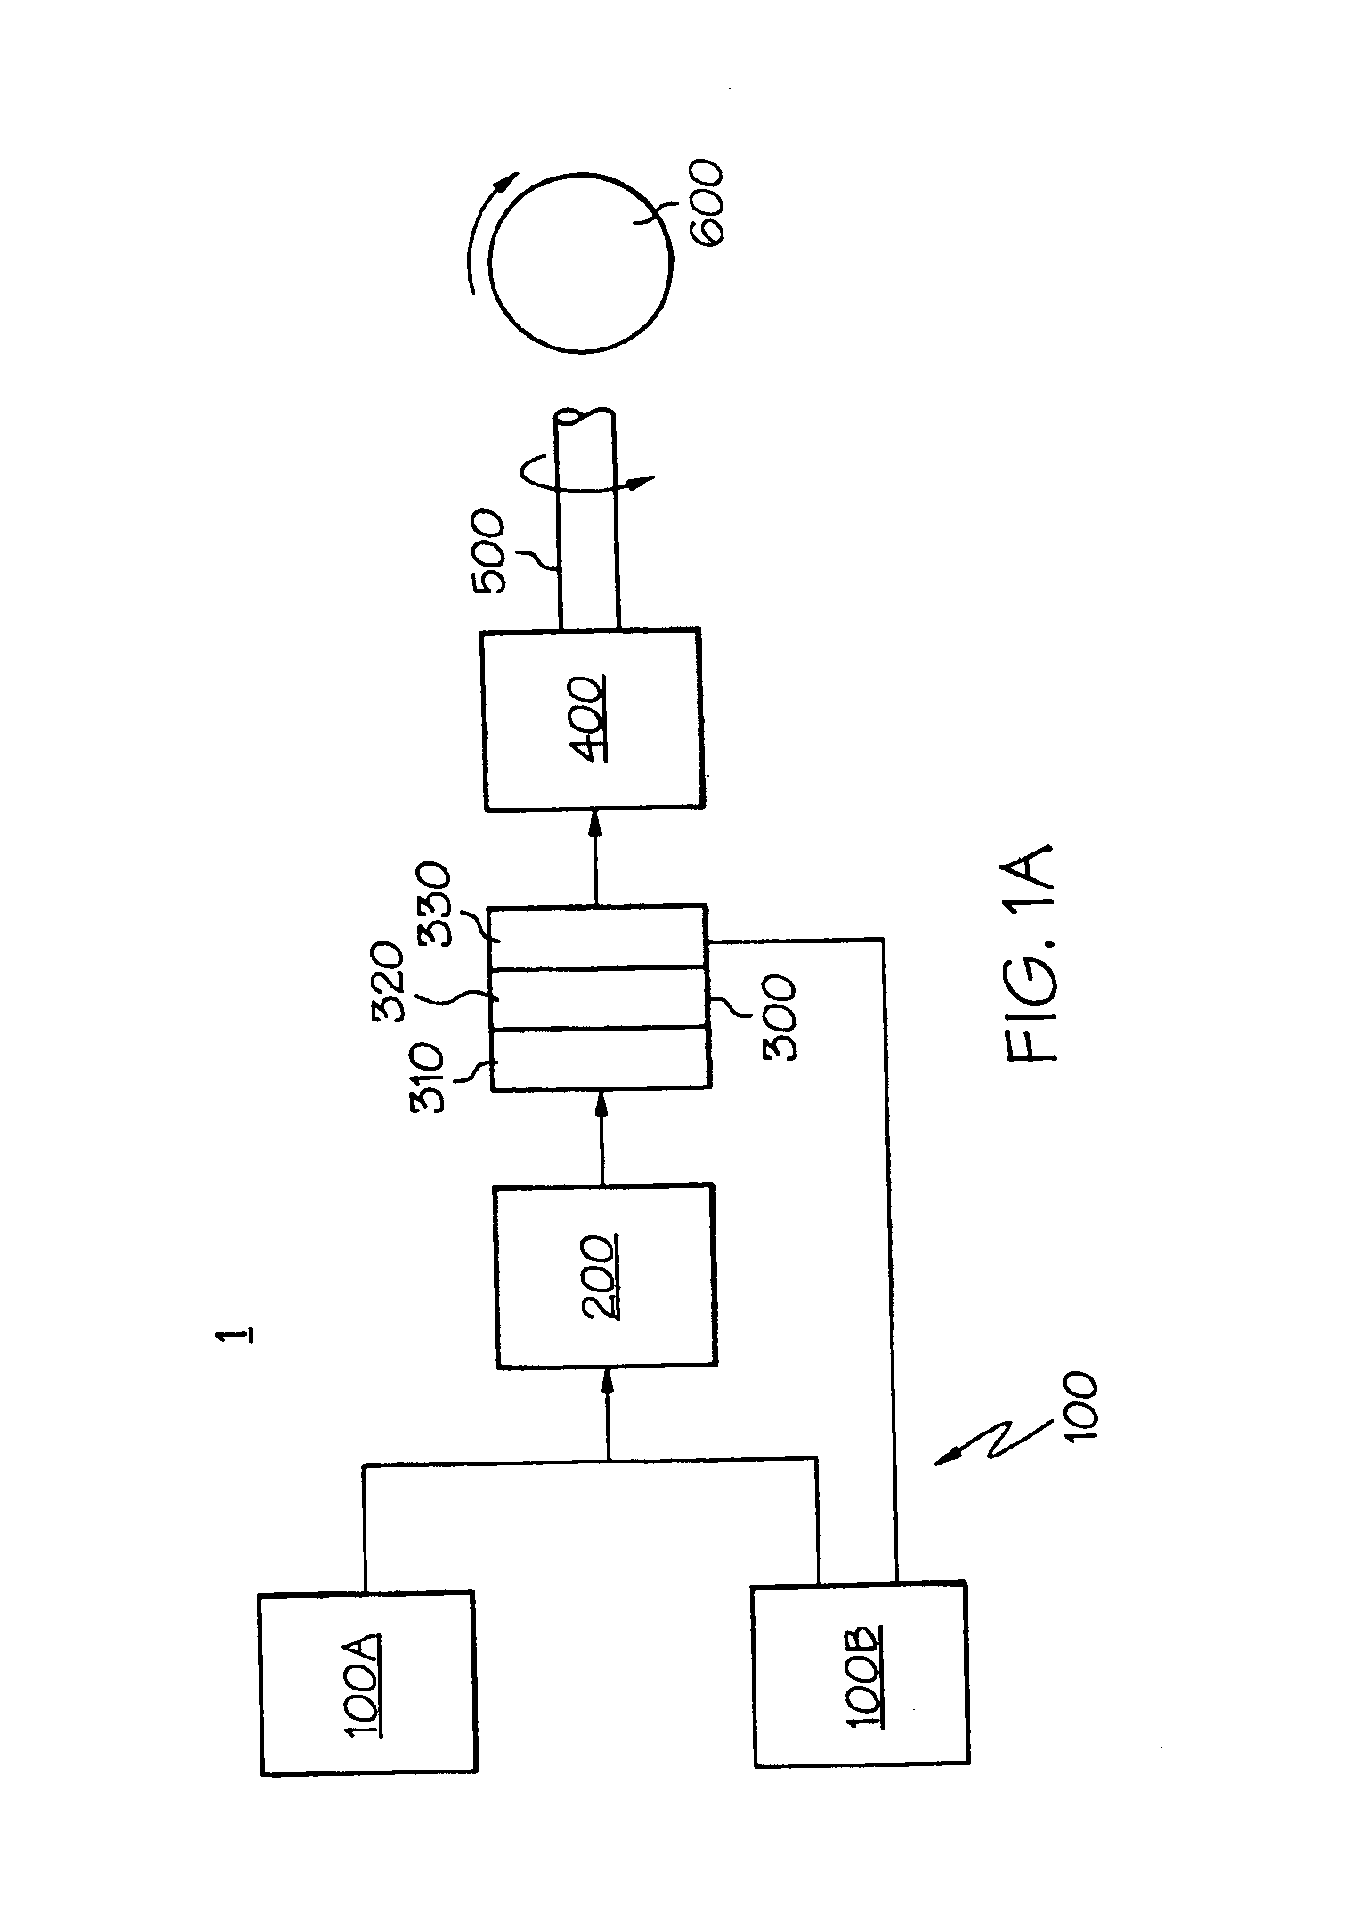 Fuel cell shutdown and startup using a cathode recycle loop